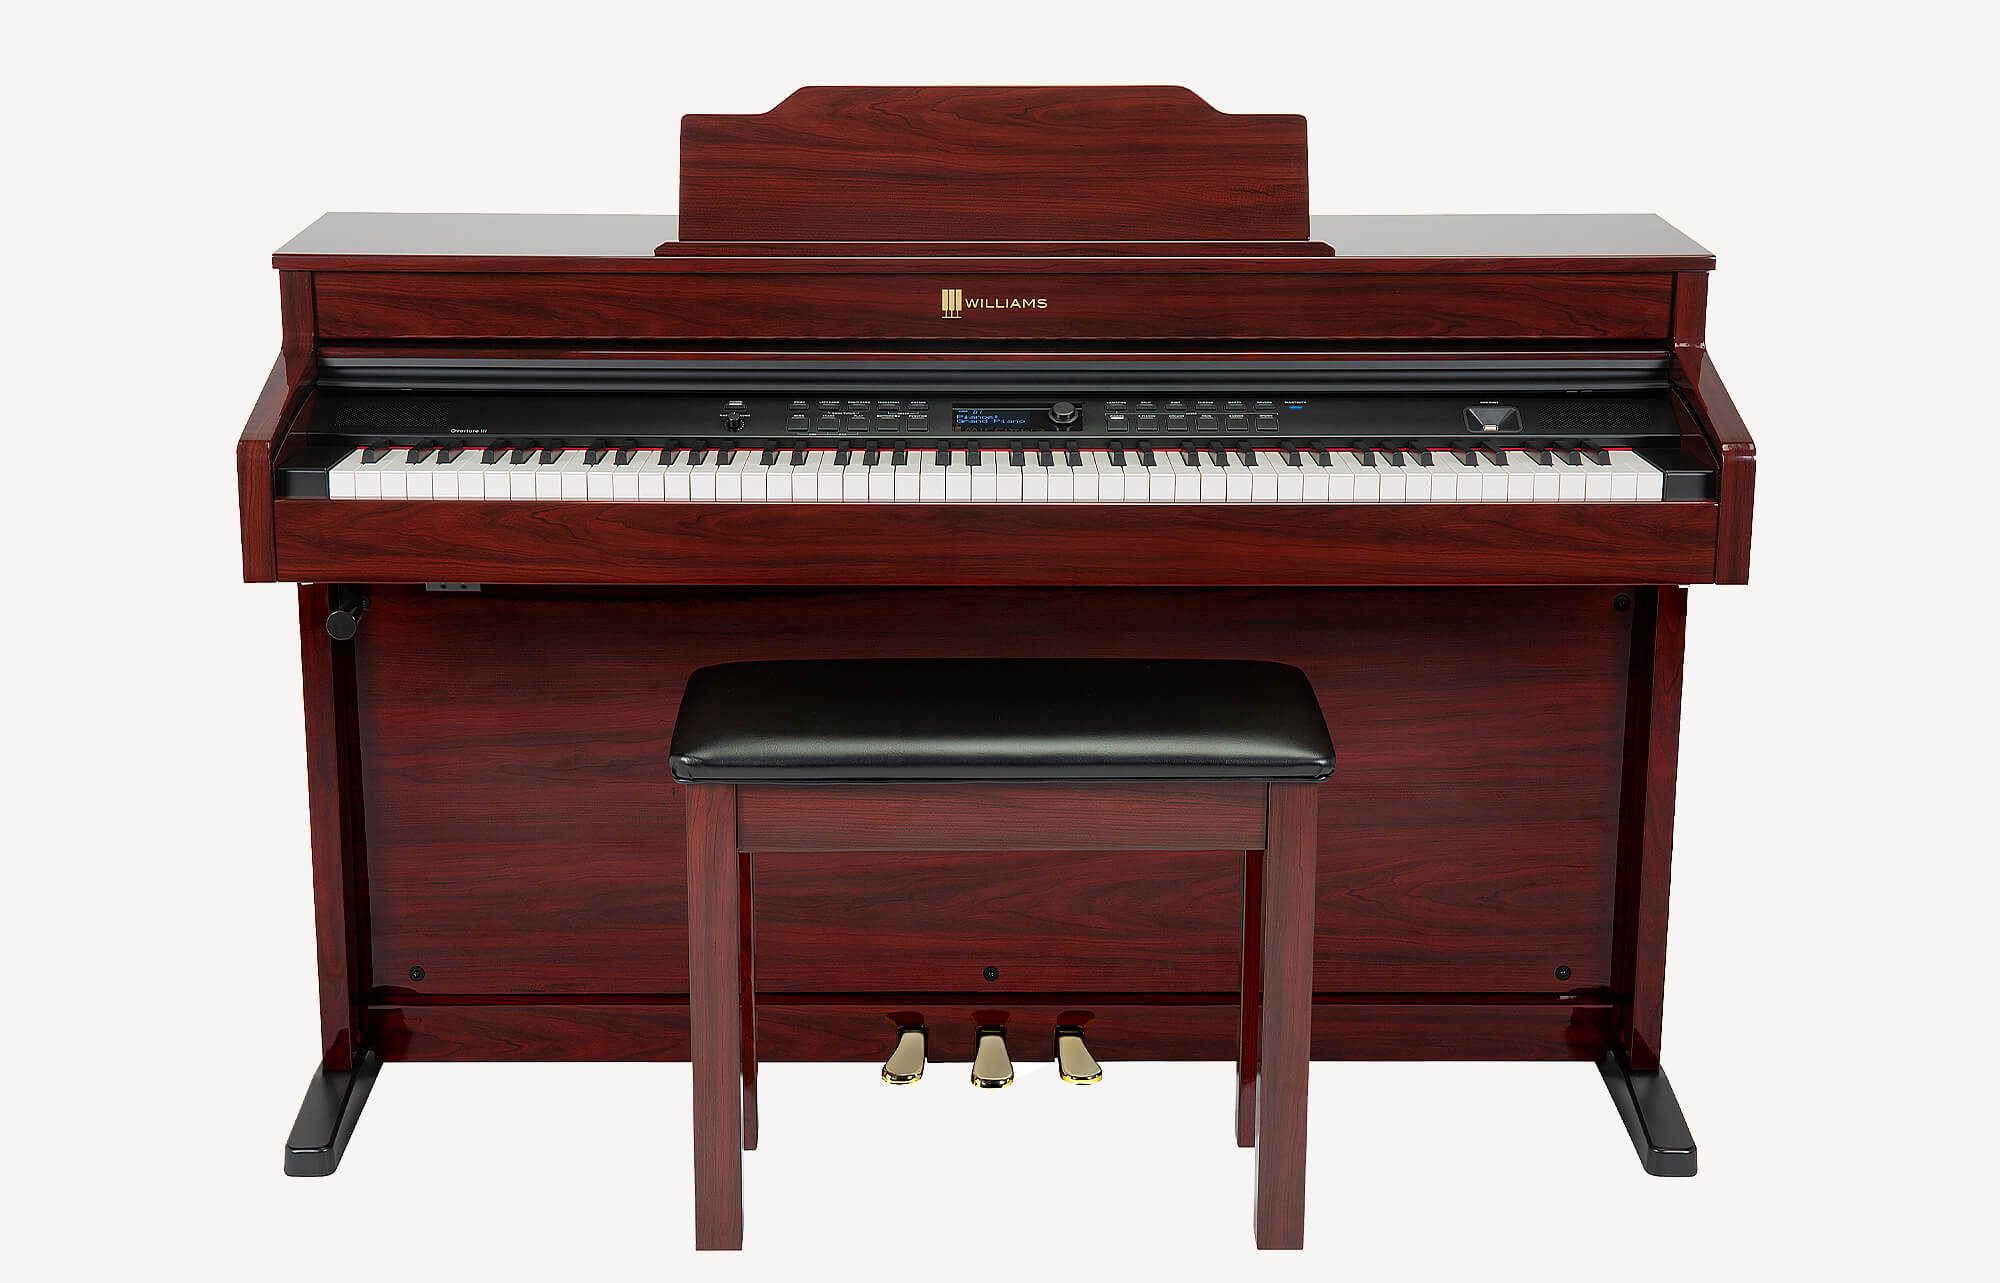 Williams Overture III digital console piano red mahogany front.